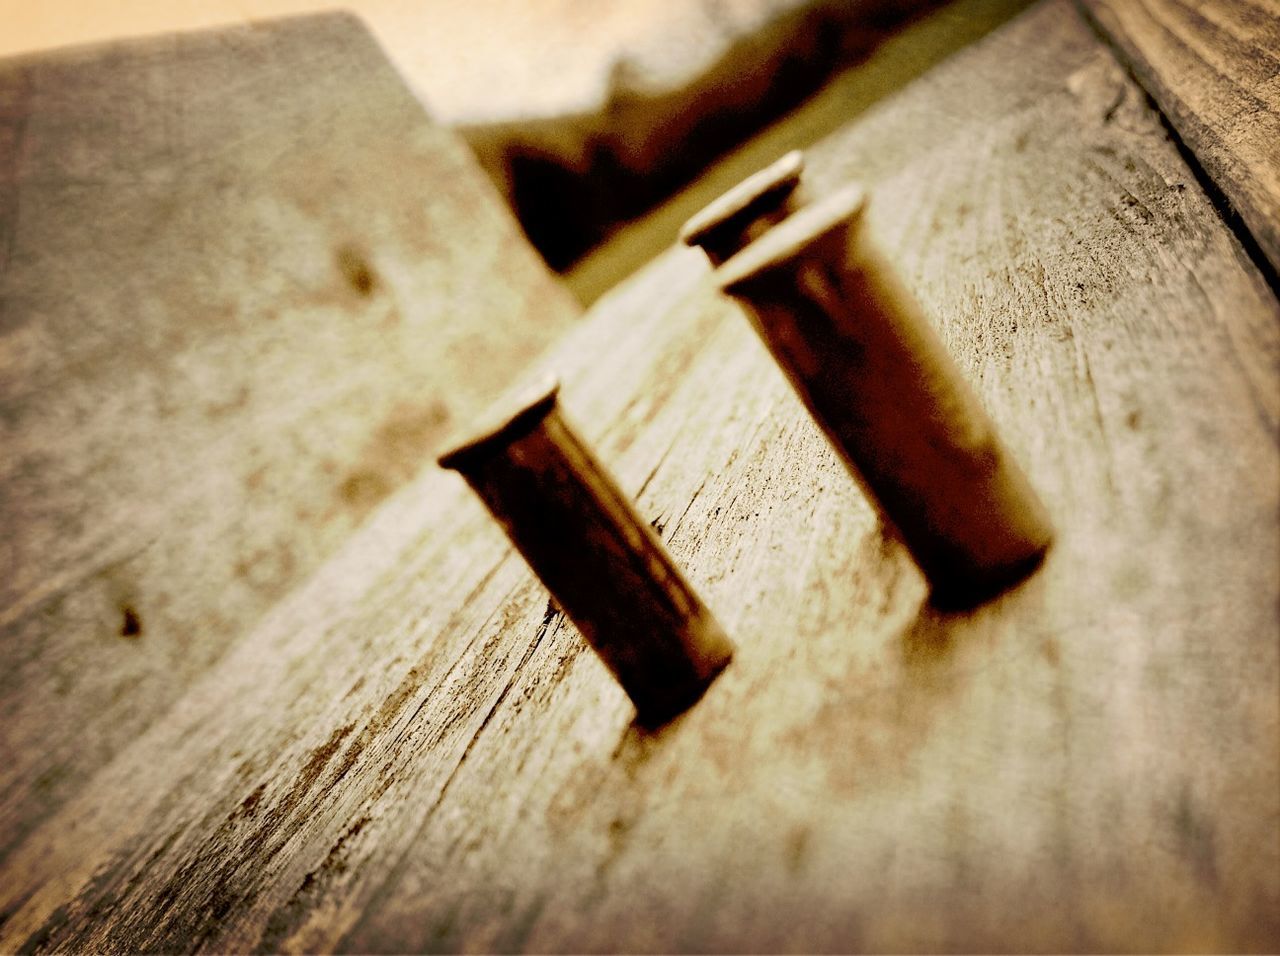 indoors, wood - material, still life, close-up, table, wooden, selective focus, wood, high angle view, metal, old, plank, single object, no people, work tool, focus on foreground, brown, nail, rusty, equipment